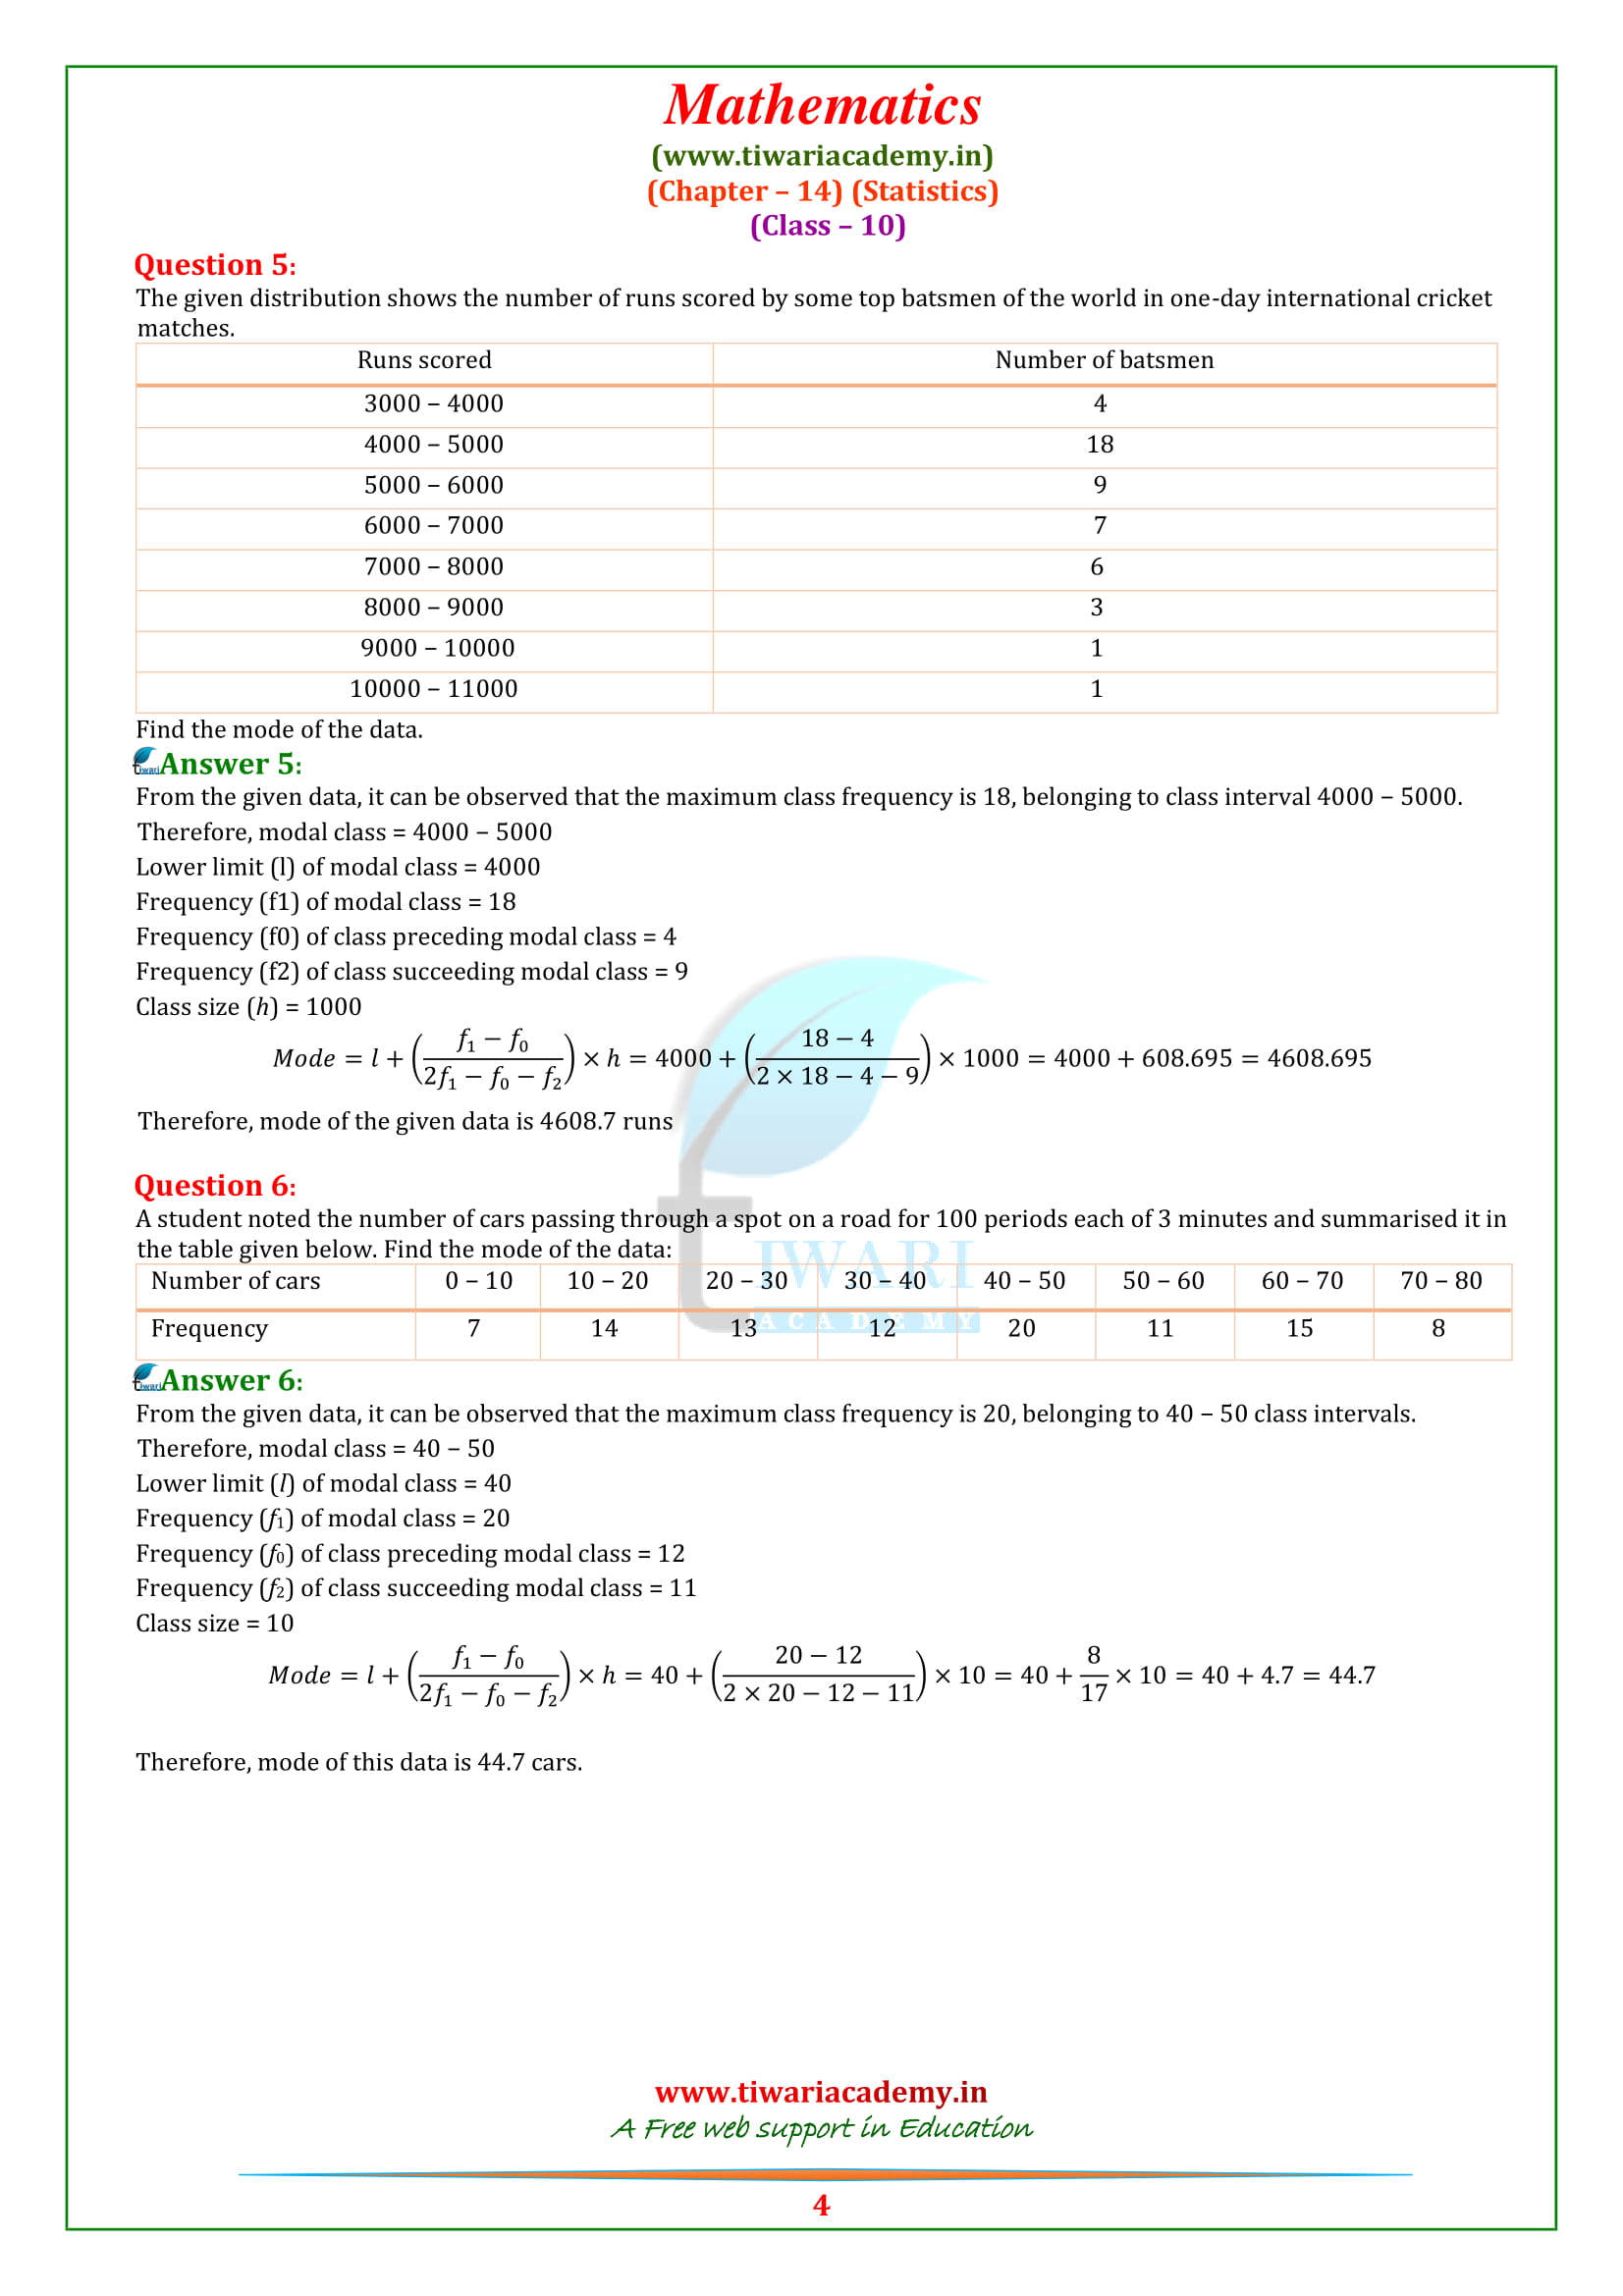 NCERT Solutions for Class 10 Maths Chapter 14 Exercise 14.2 Statistics question 1, 2, 3, 4, 5, 6, 7, 8.